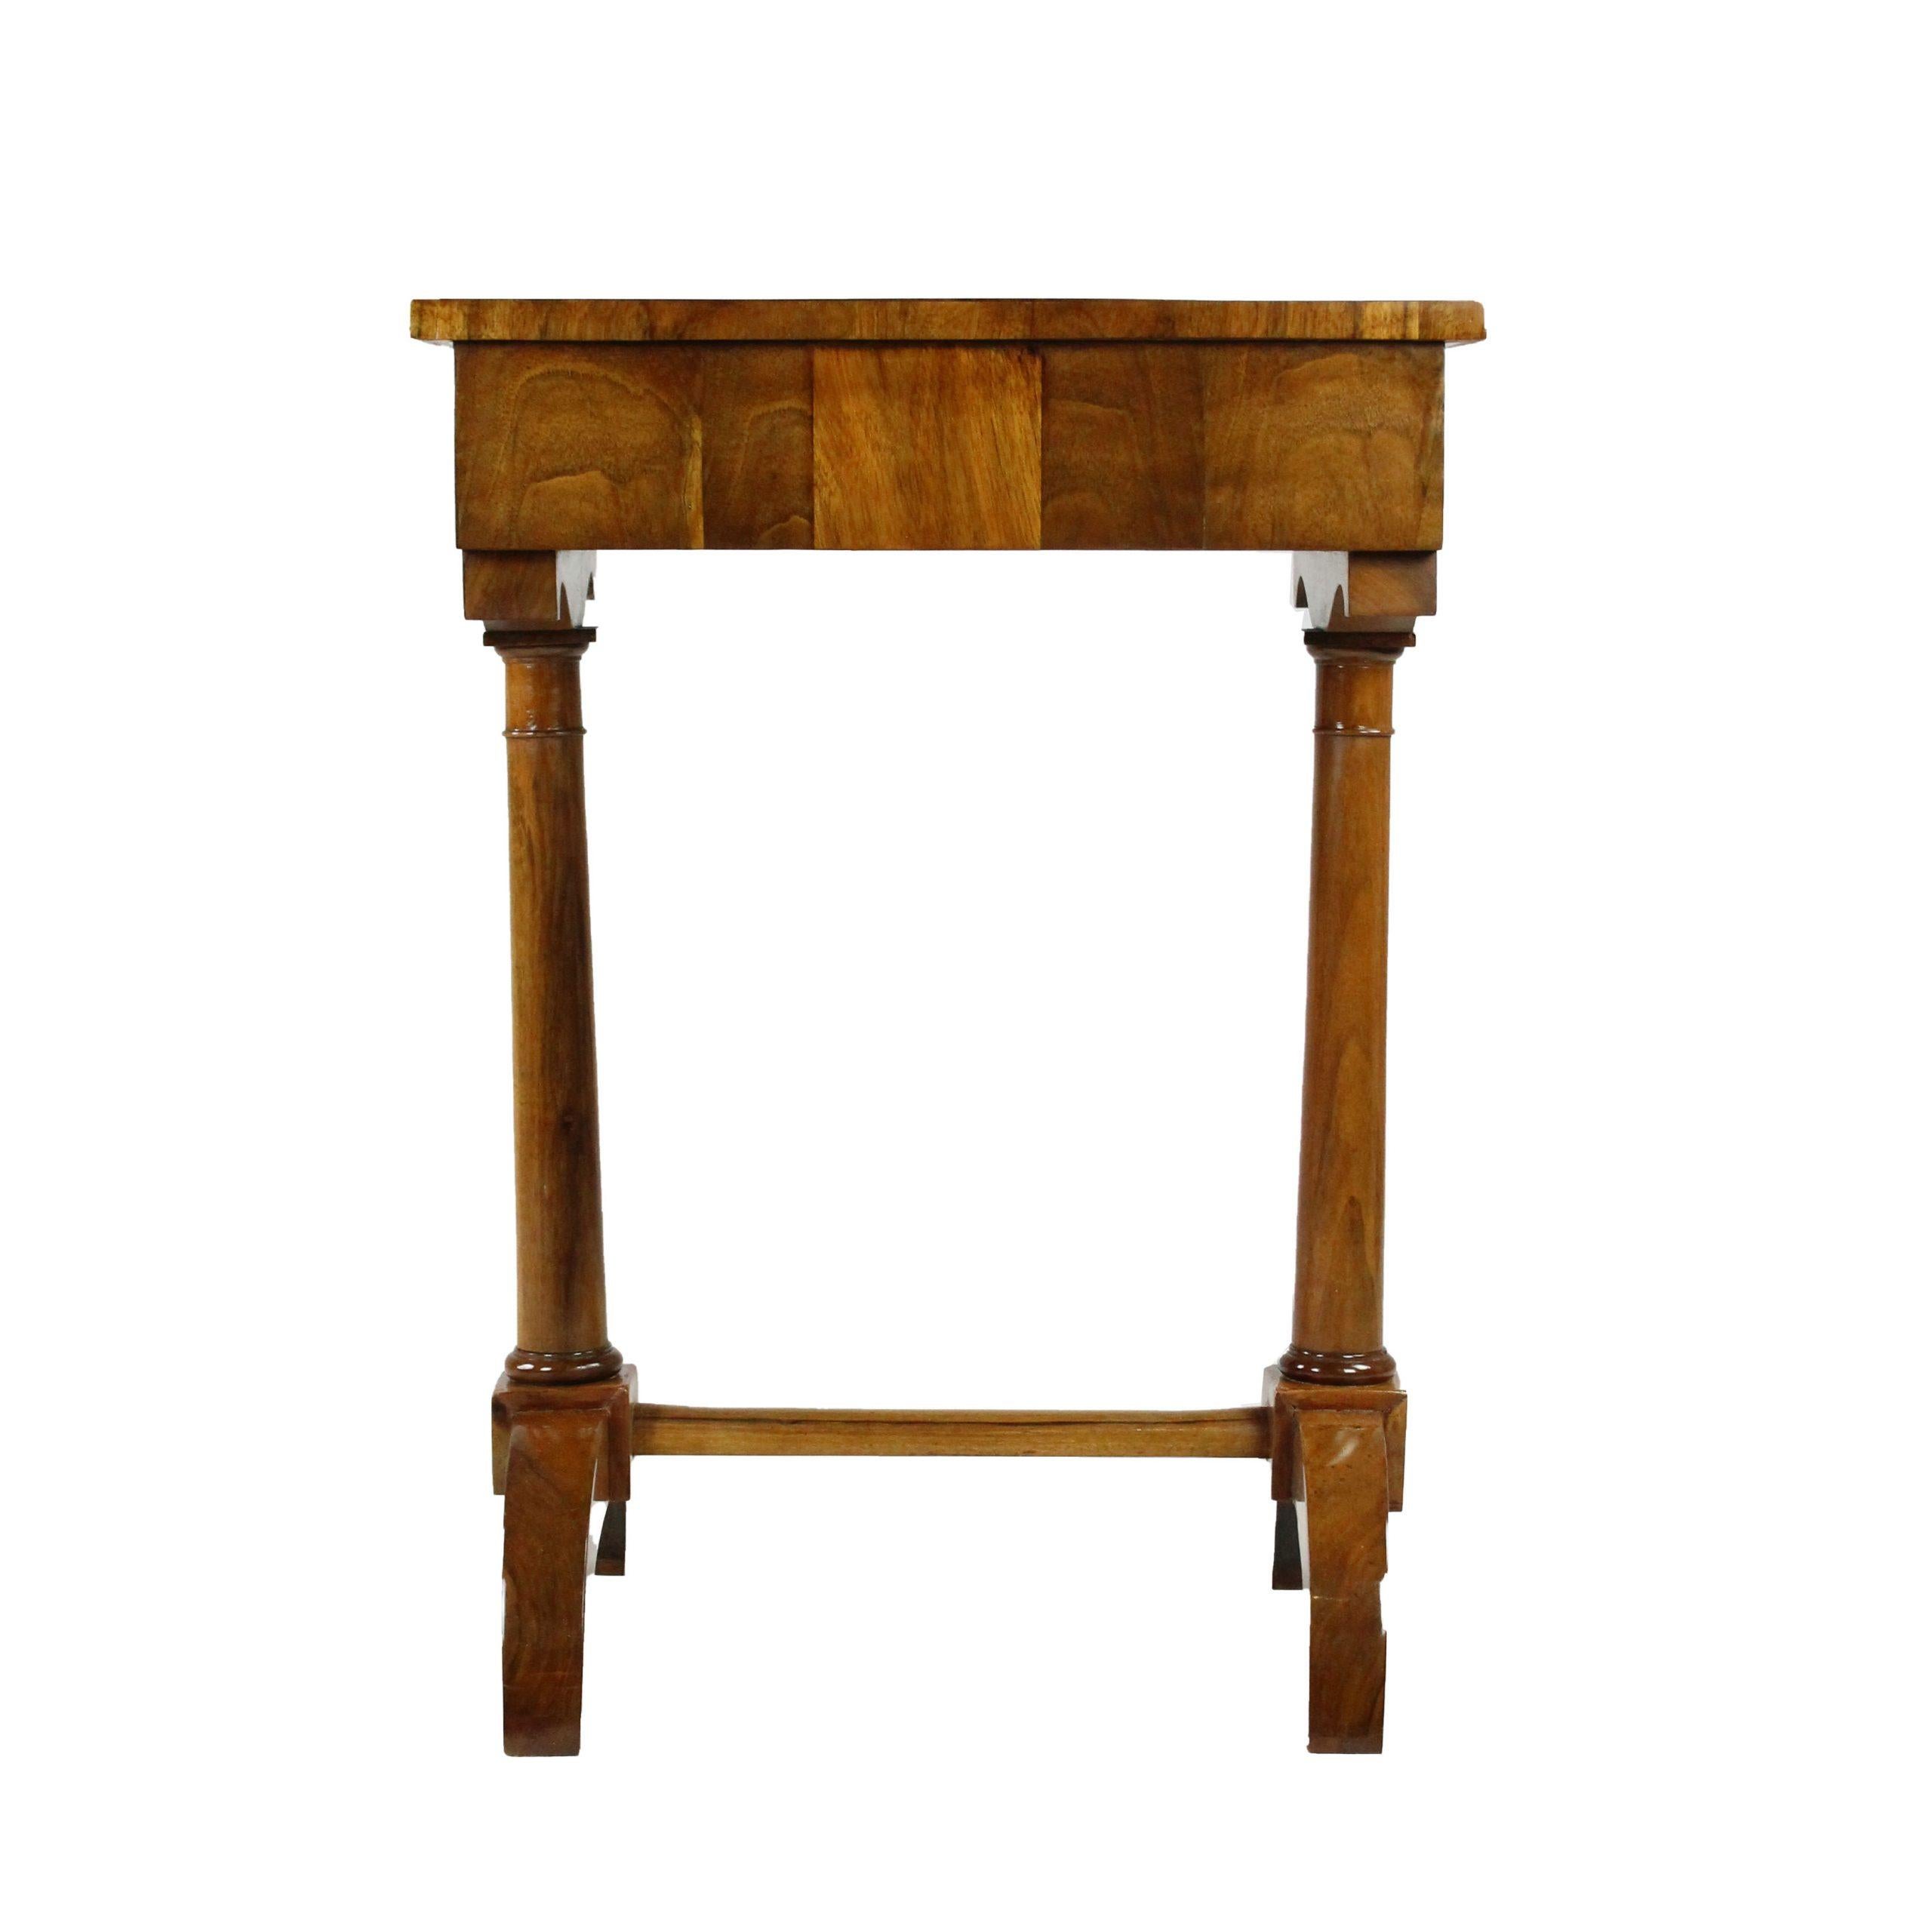 Biedermeier side table, walnut veneered, 1 hidden drawer with interior partition and fold-out pincushion, restored condition, shellac polish

height: 77 cm, width 55,5 cm, depth 39 cm